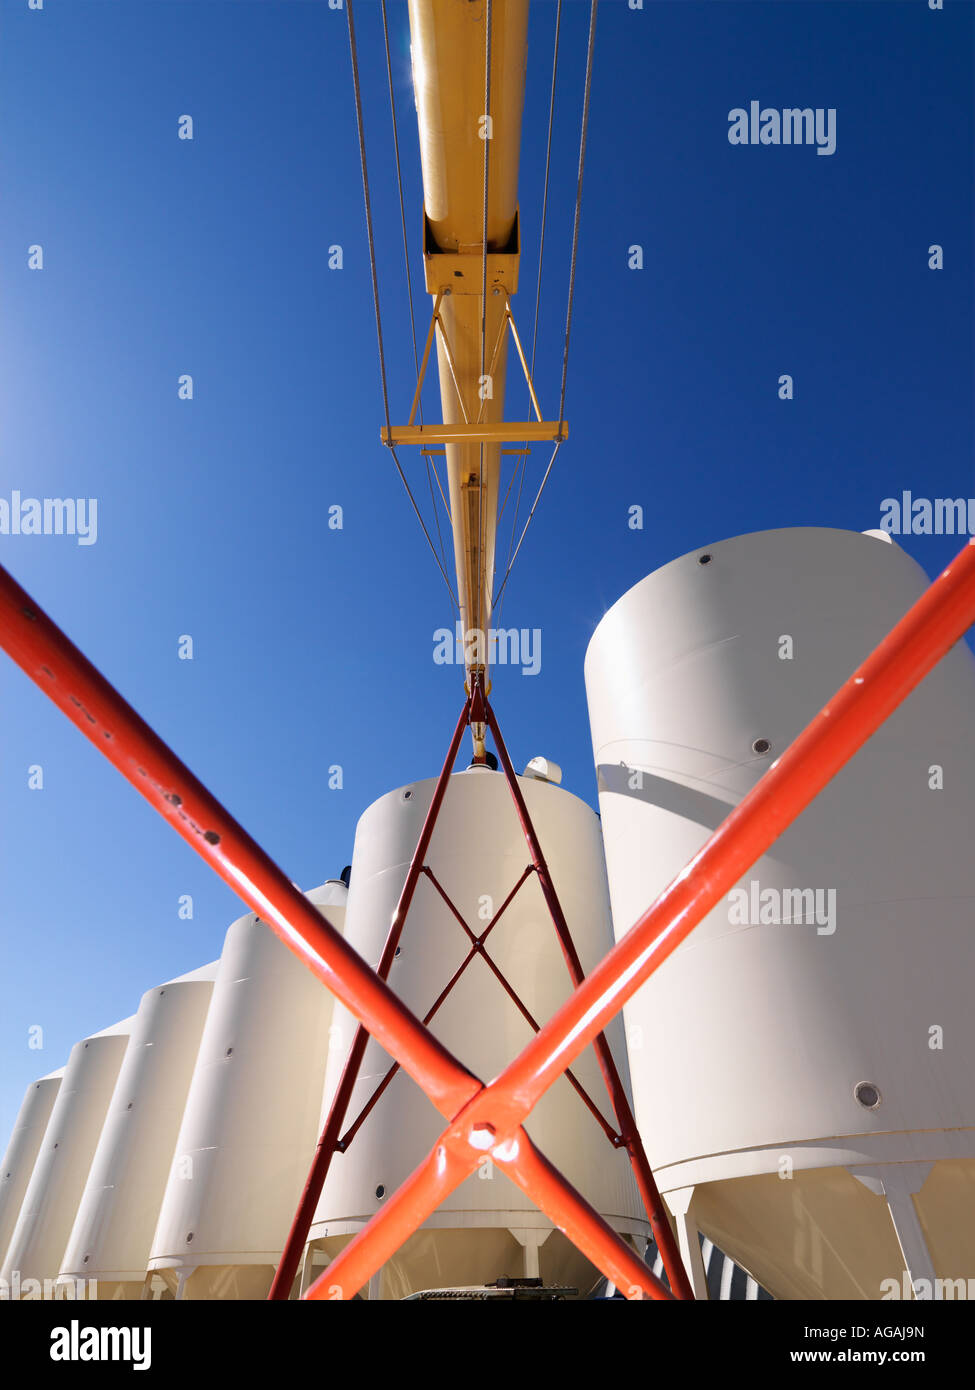 Low angle view of metal grain storage silo facility against blue background Stock Photo